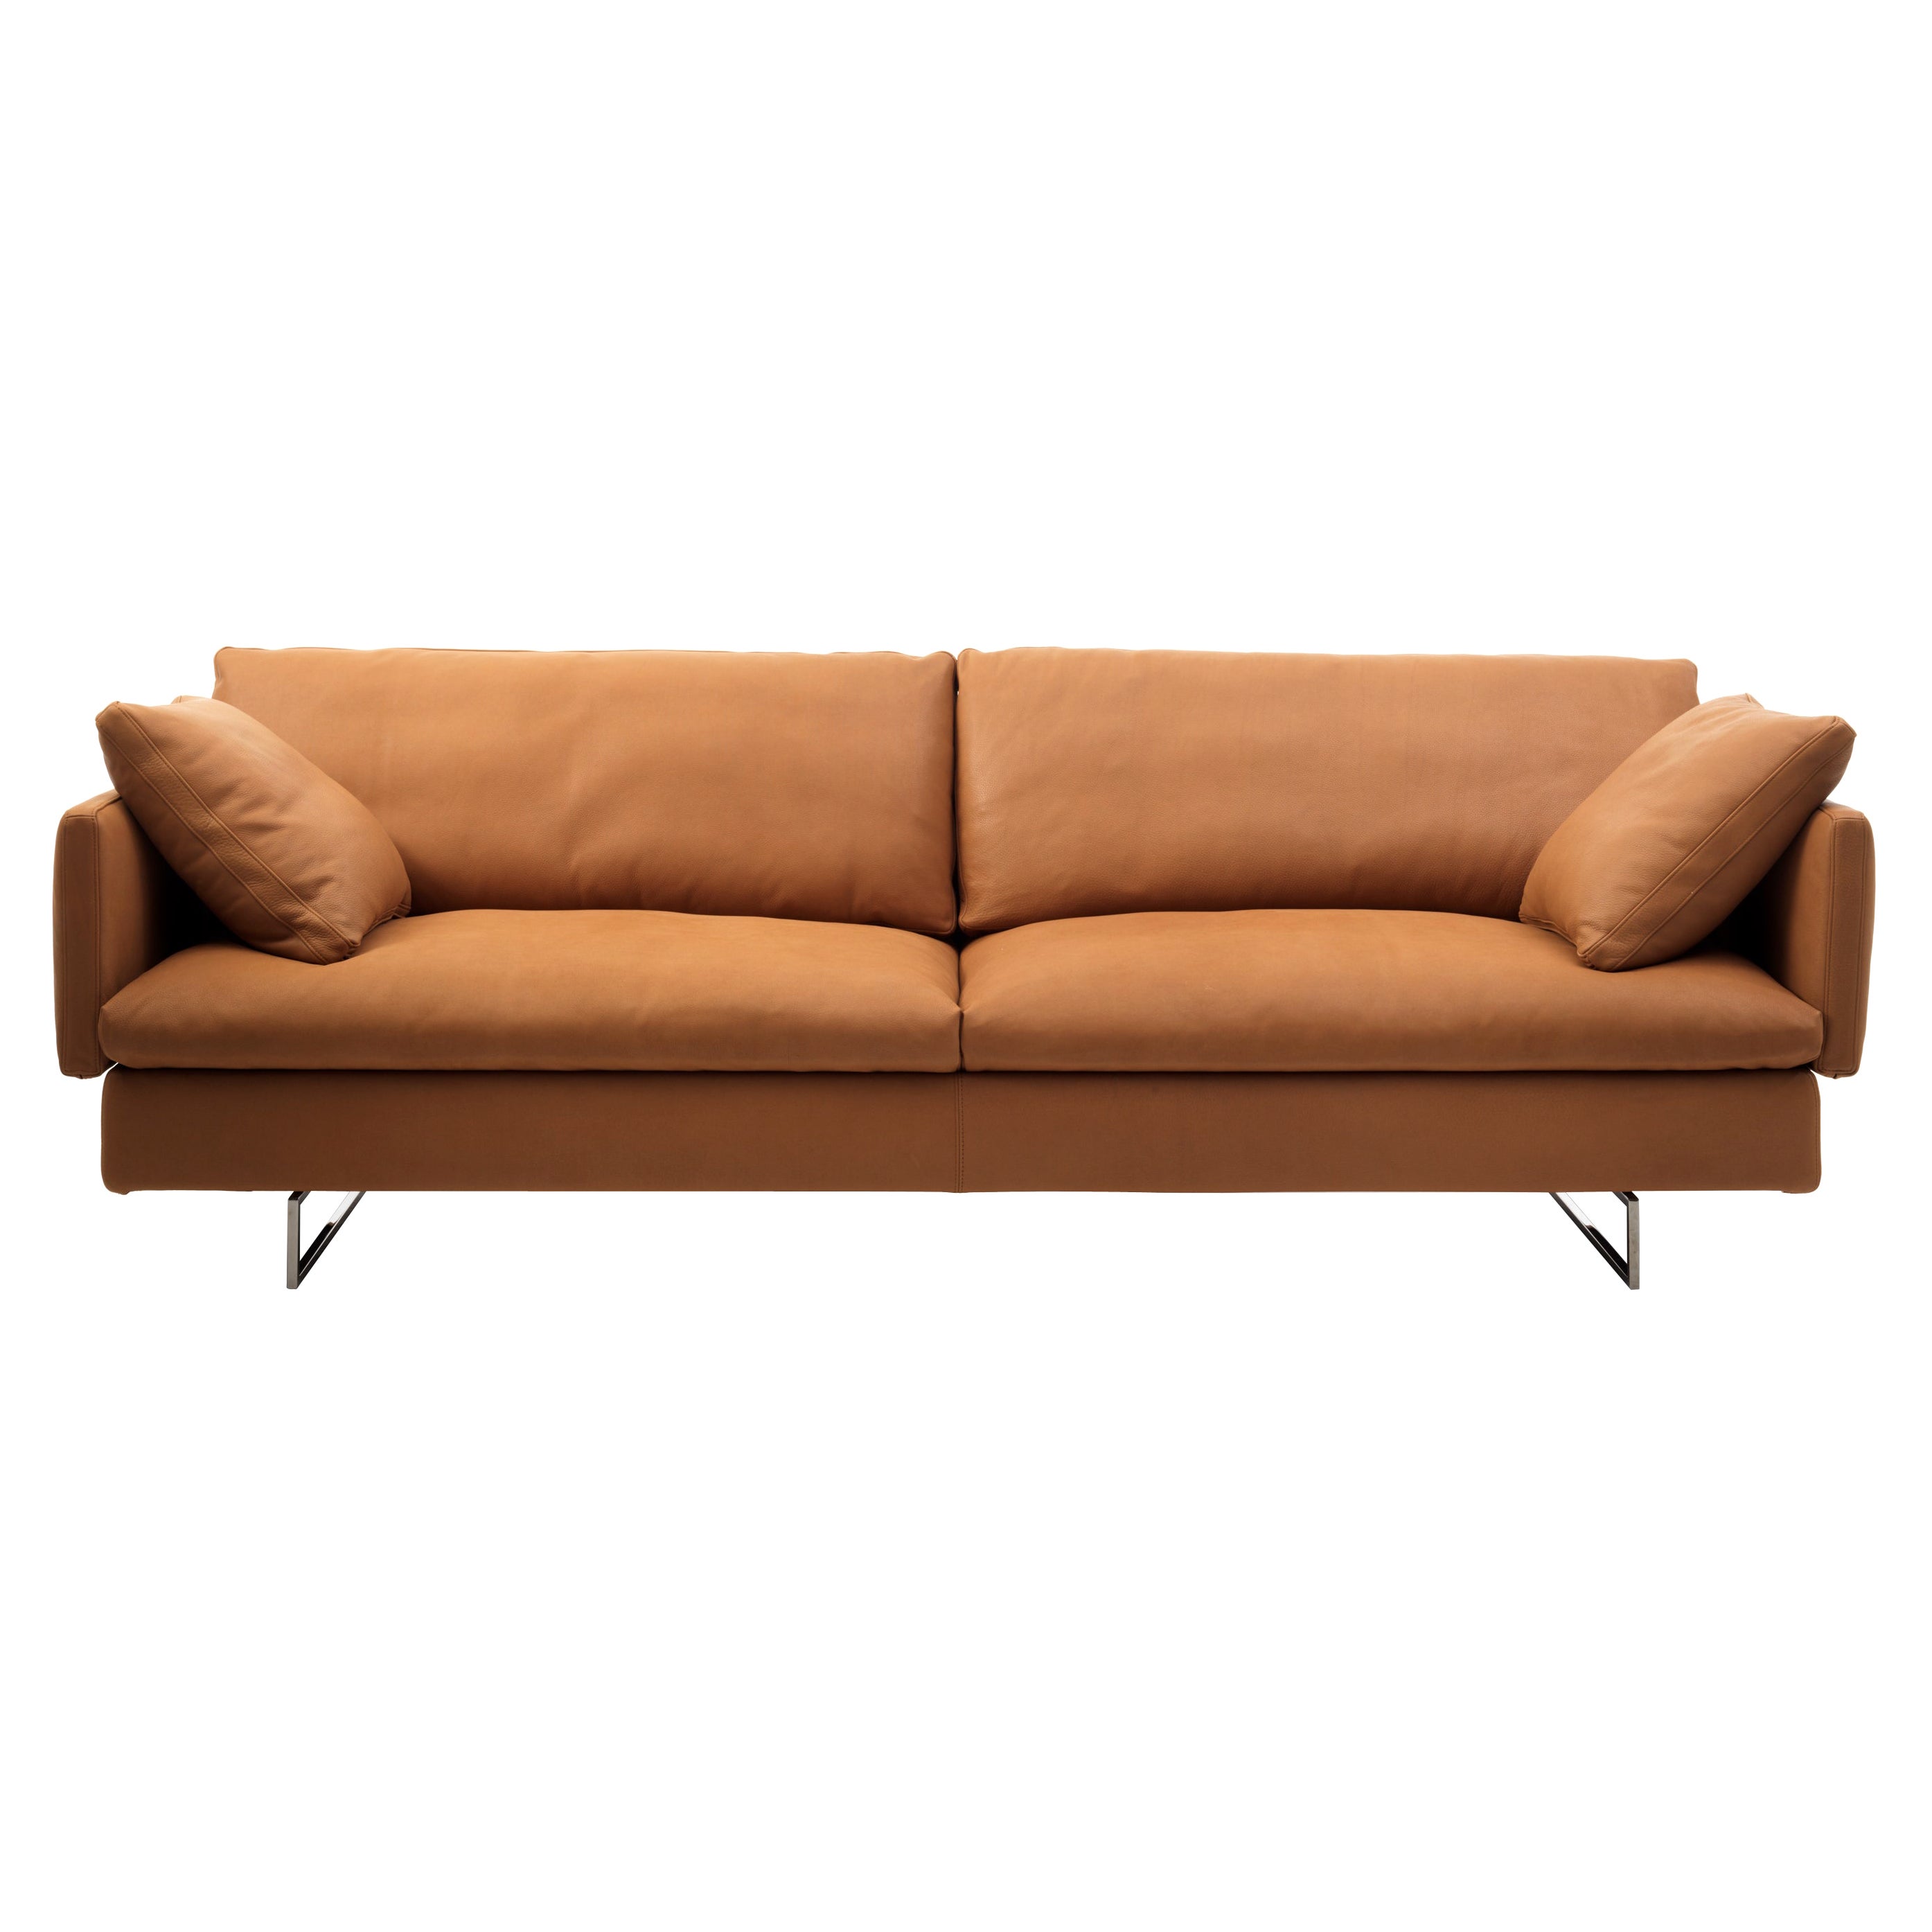 Voyage Sofa in Natural Leather Upholstery & Black Nickel Frame by Sergio Bicego